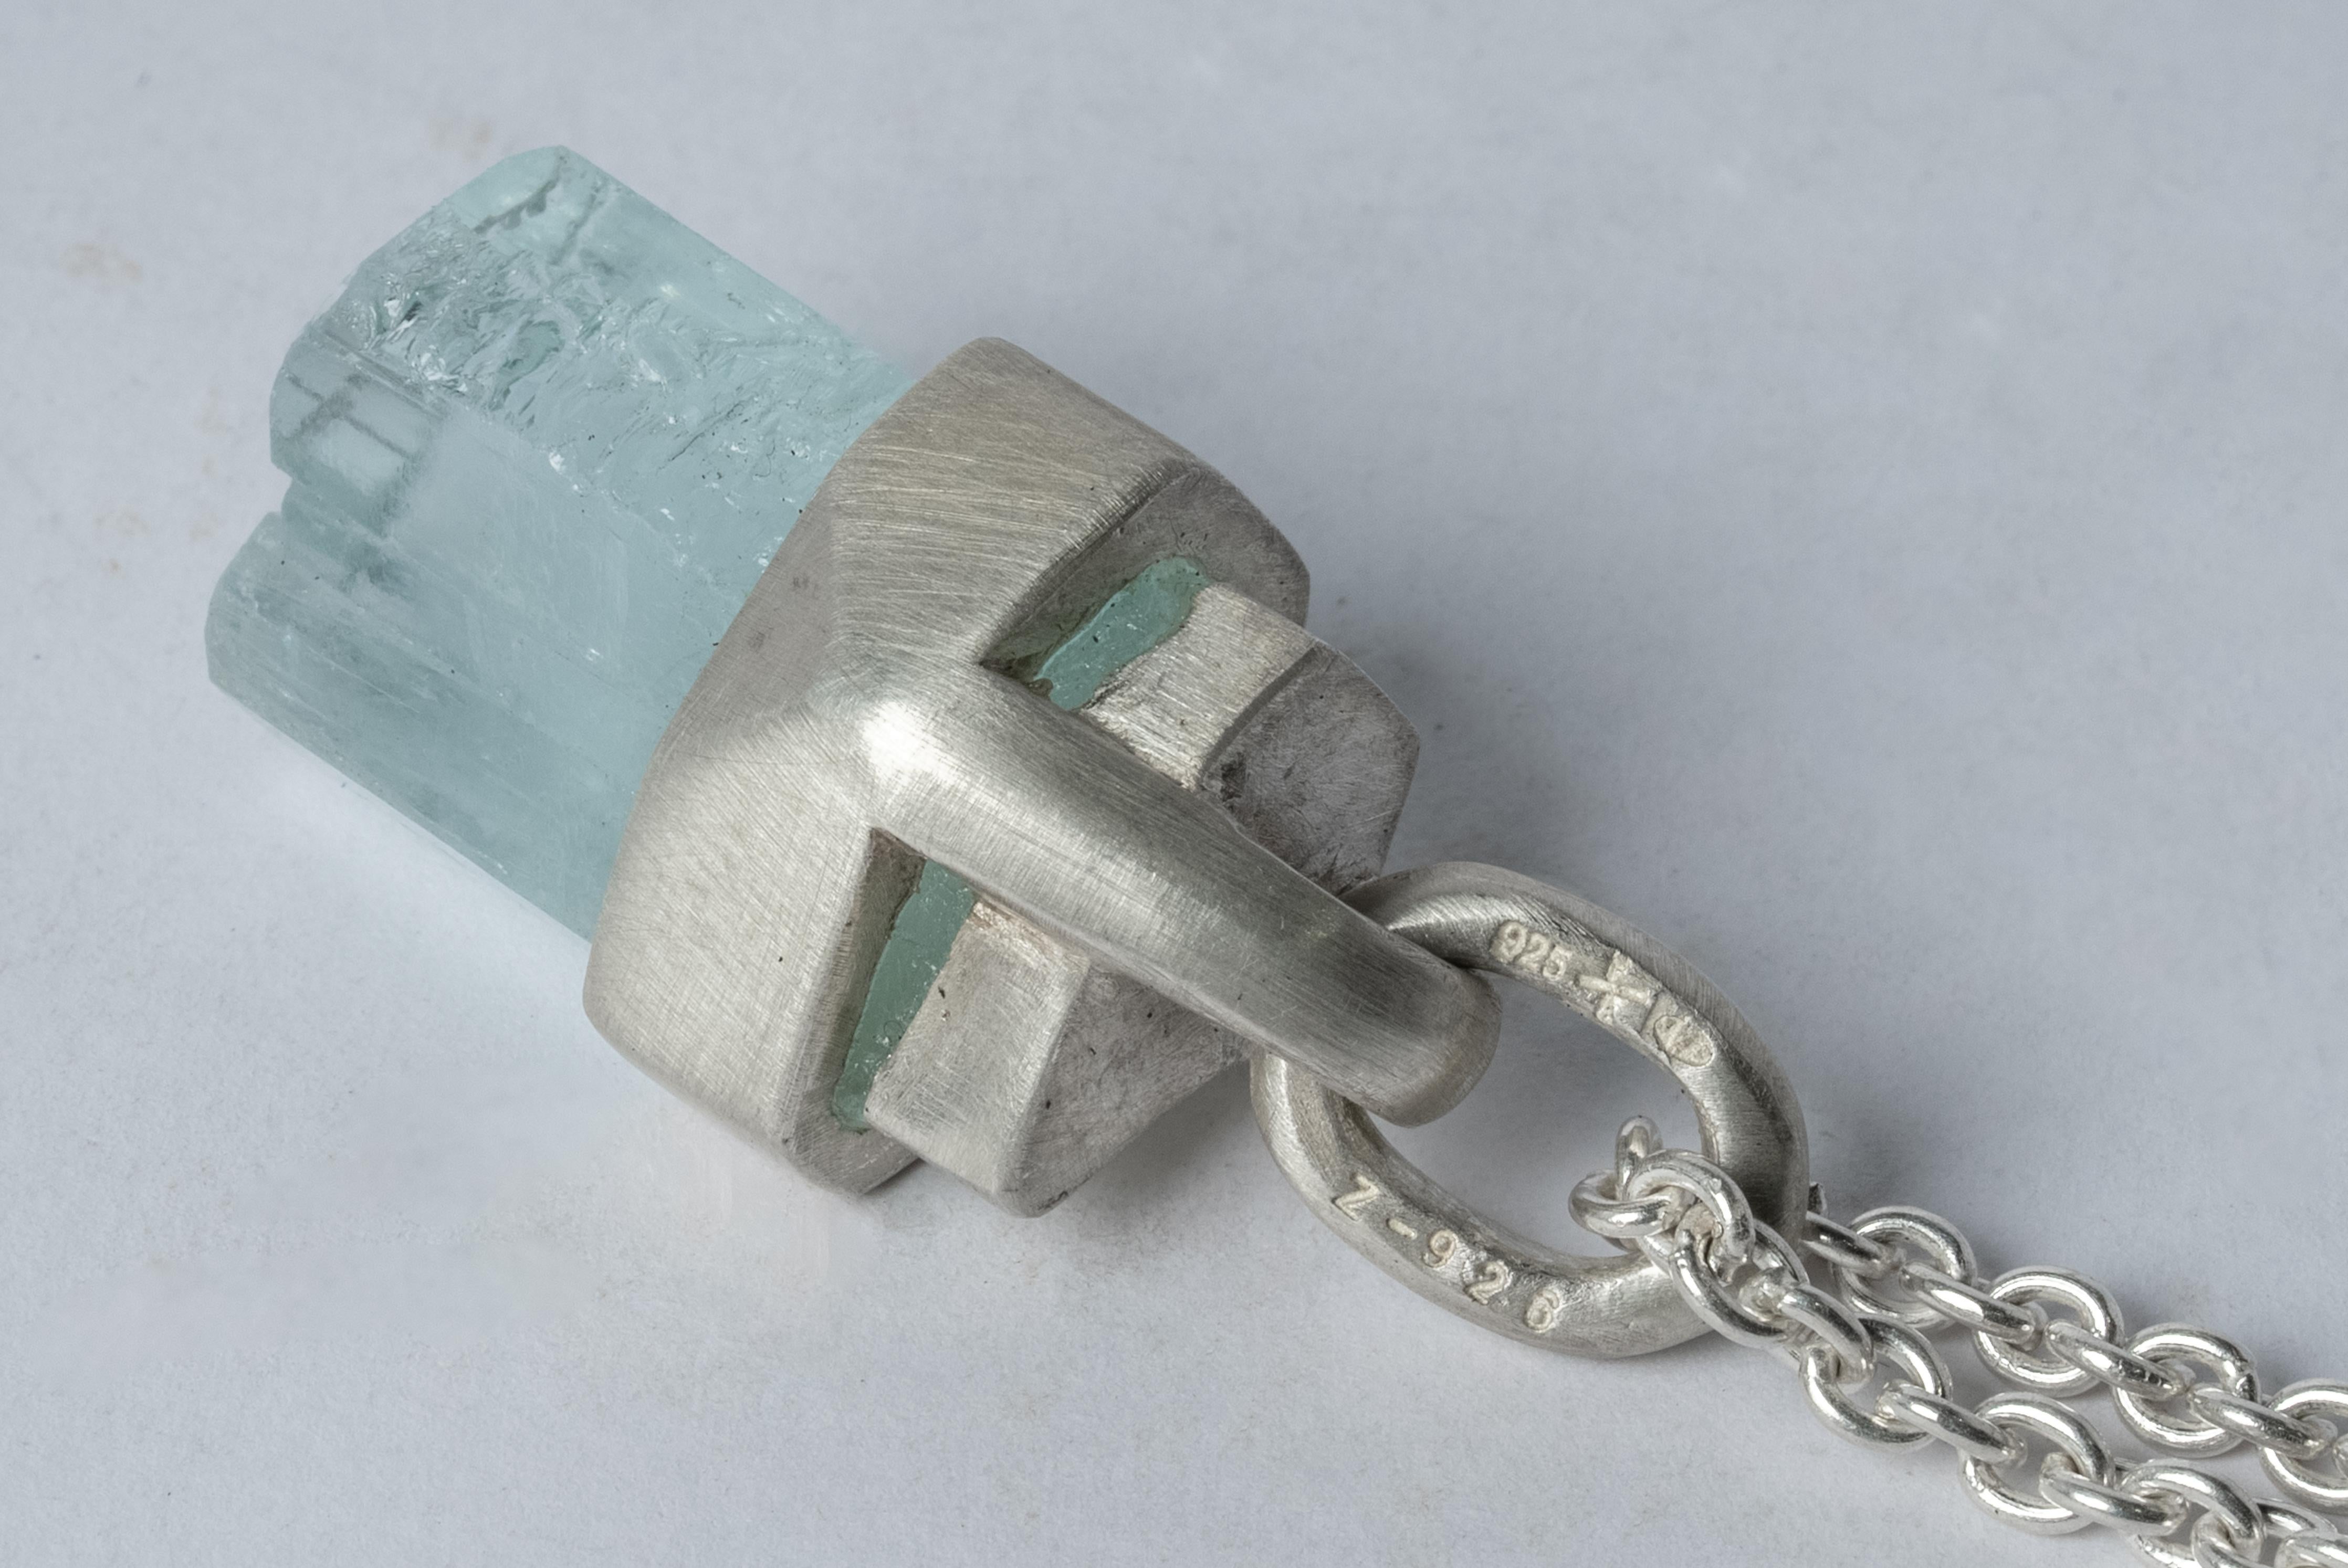 Talisman necklace in matte sterling silver and a rough of aquamarine. The Talisman series is an exploration into the power of natural crystals. The crystals used in these pieces are discovered through adventure and are hand selected. Each piece is